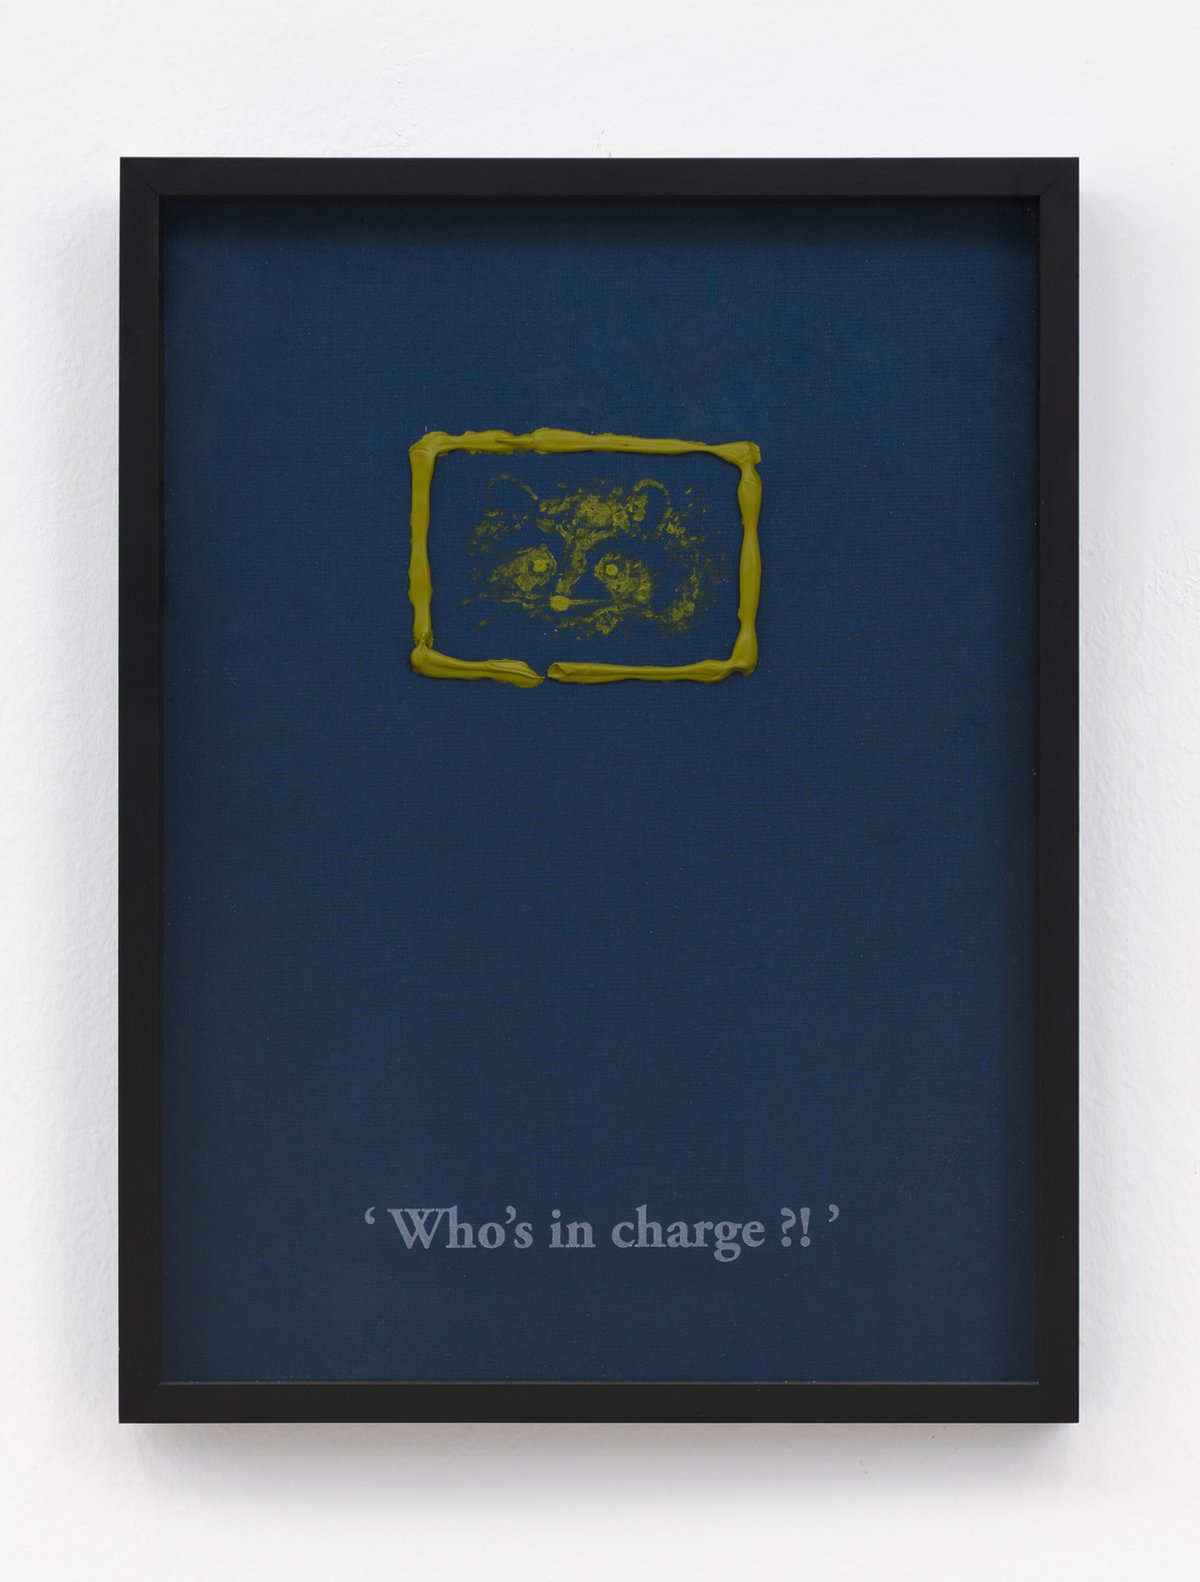 Philipp Timischl&quot;Who&#x27;s in charge?!&quot; (Navy/Green Yellowish), 2017Acrylic on linen and glass-engraved object frame40.1 x 32.1 cm